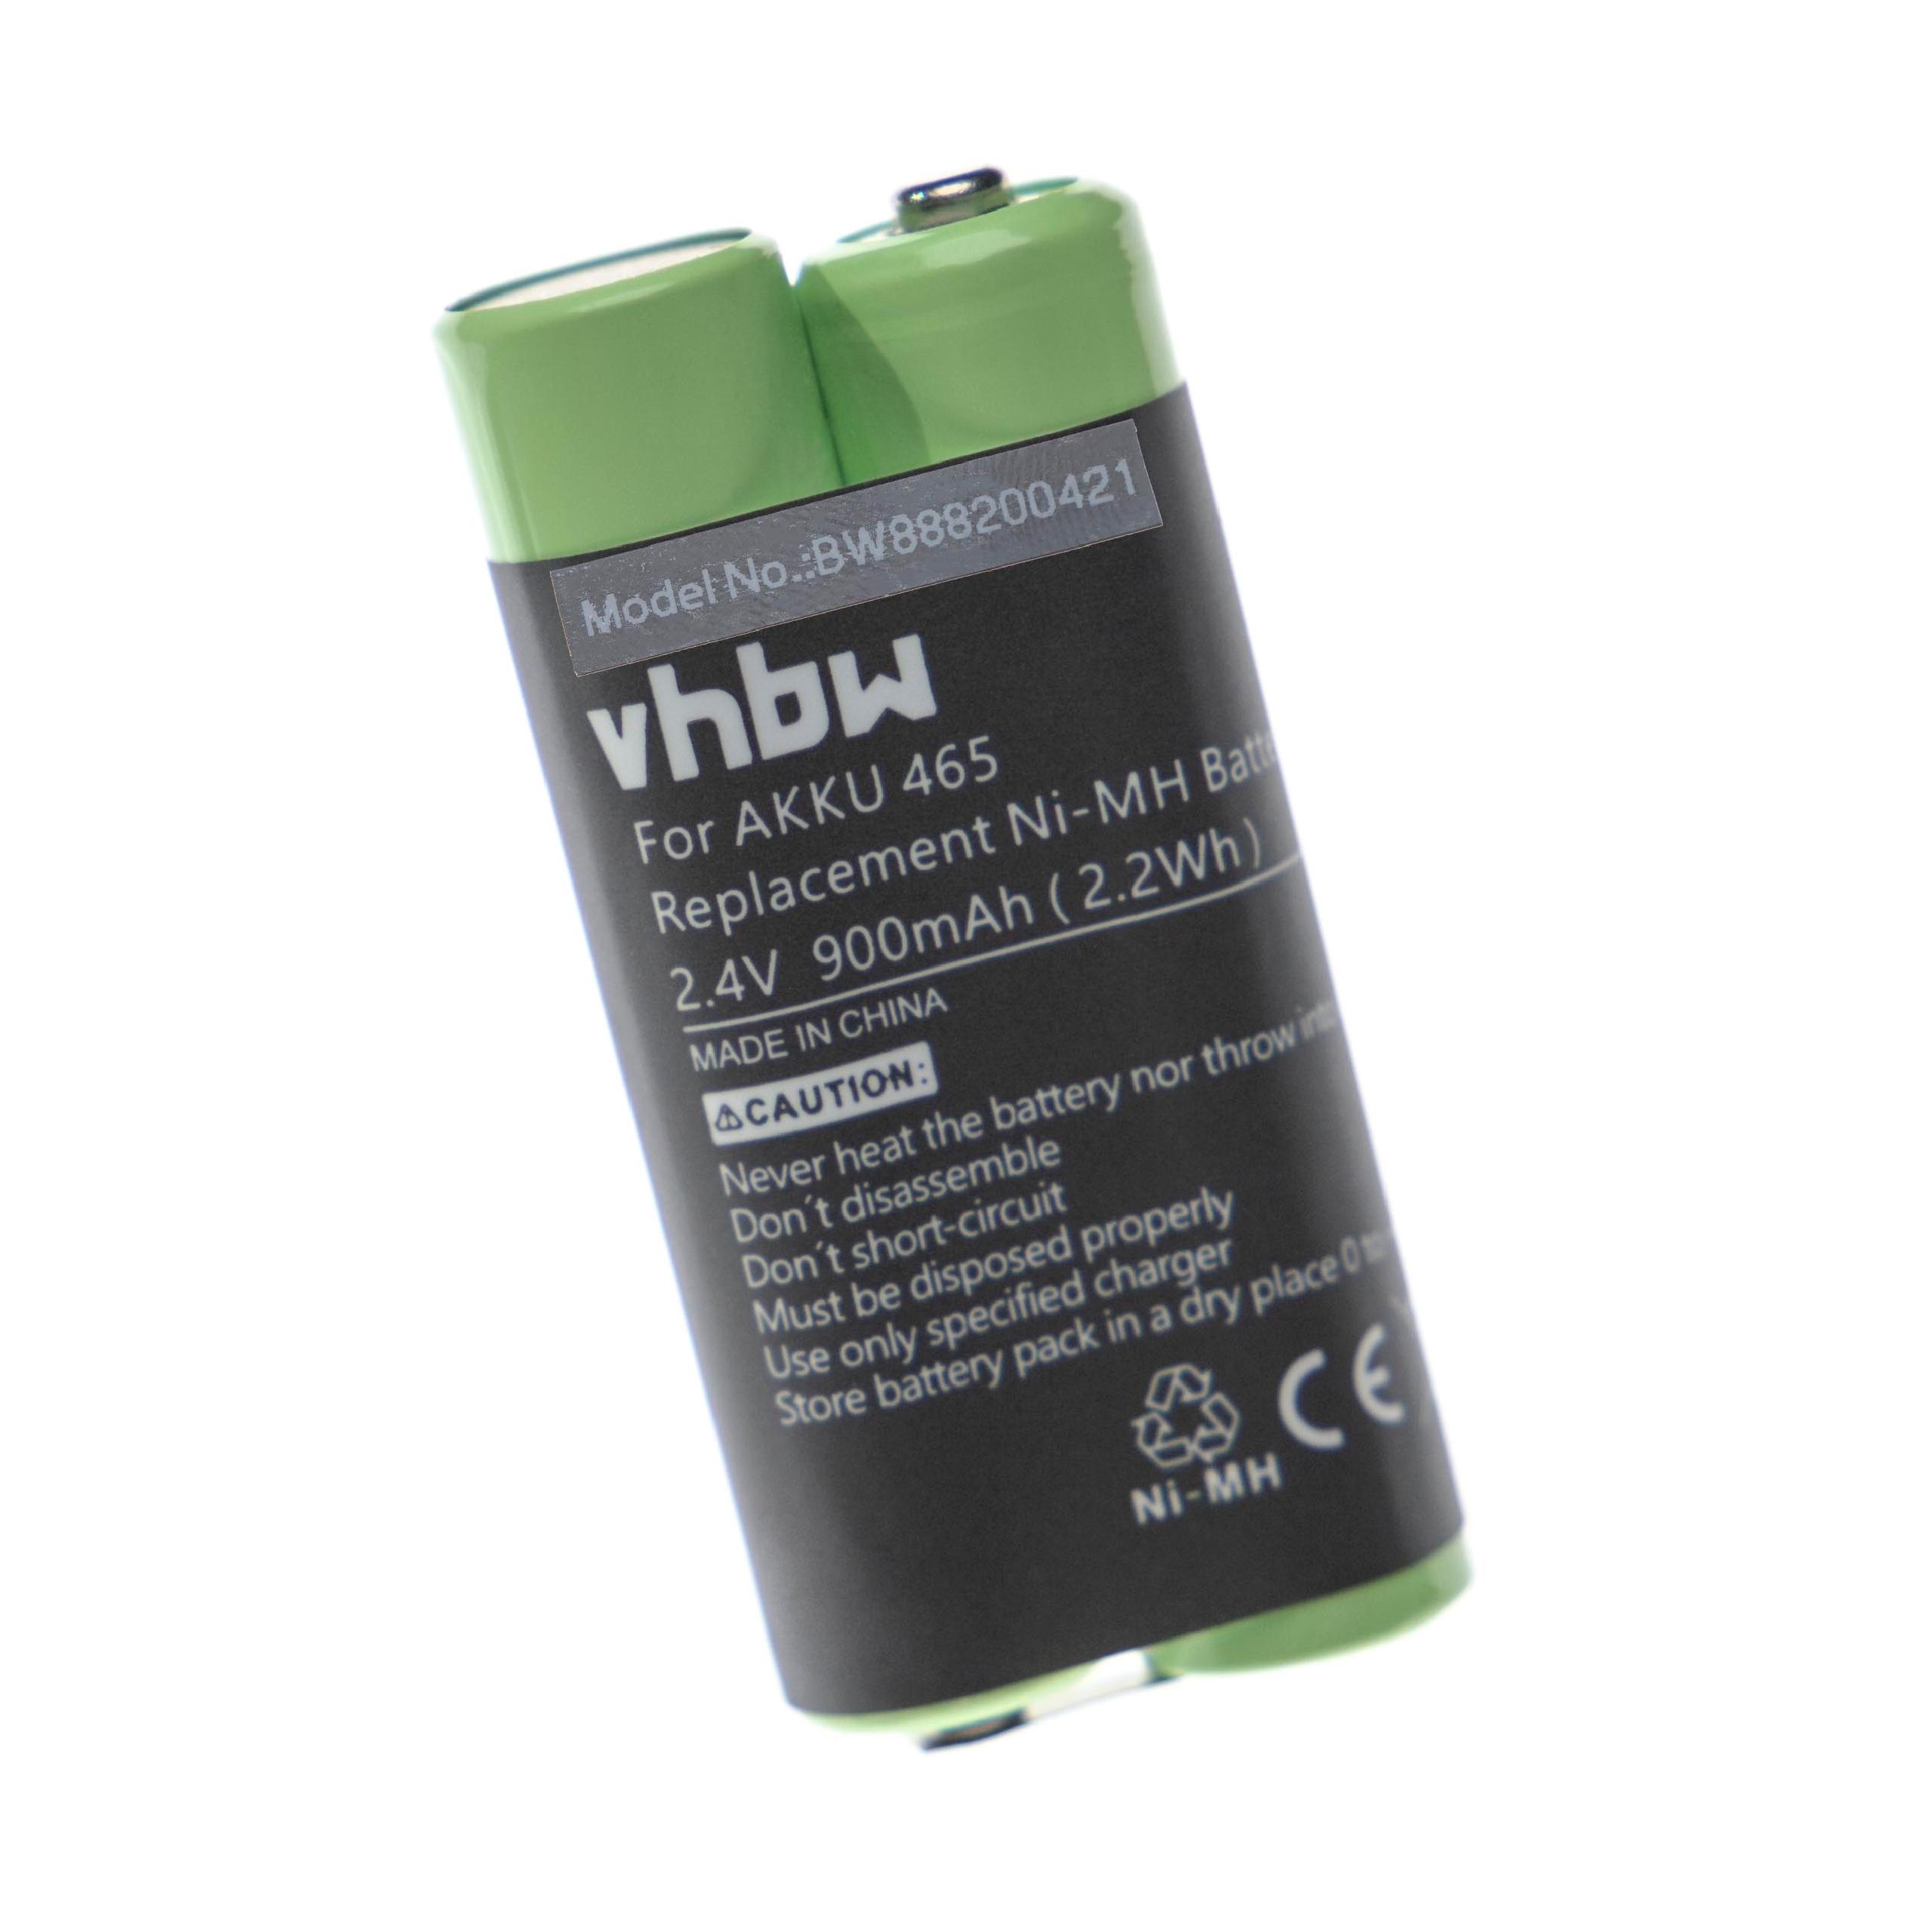 Batterie remplace Grundig GZR1900, 465 pour dictaphone - 900mAh 2,4V NiMH